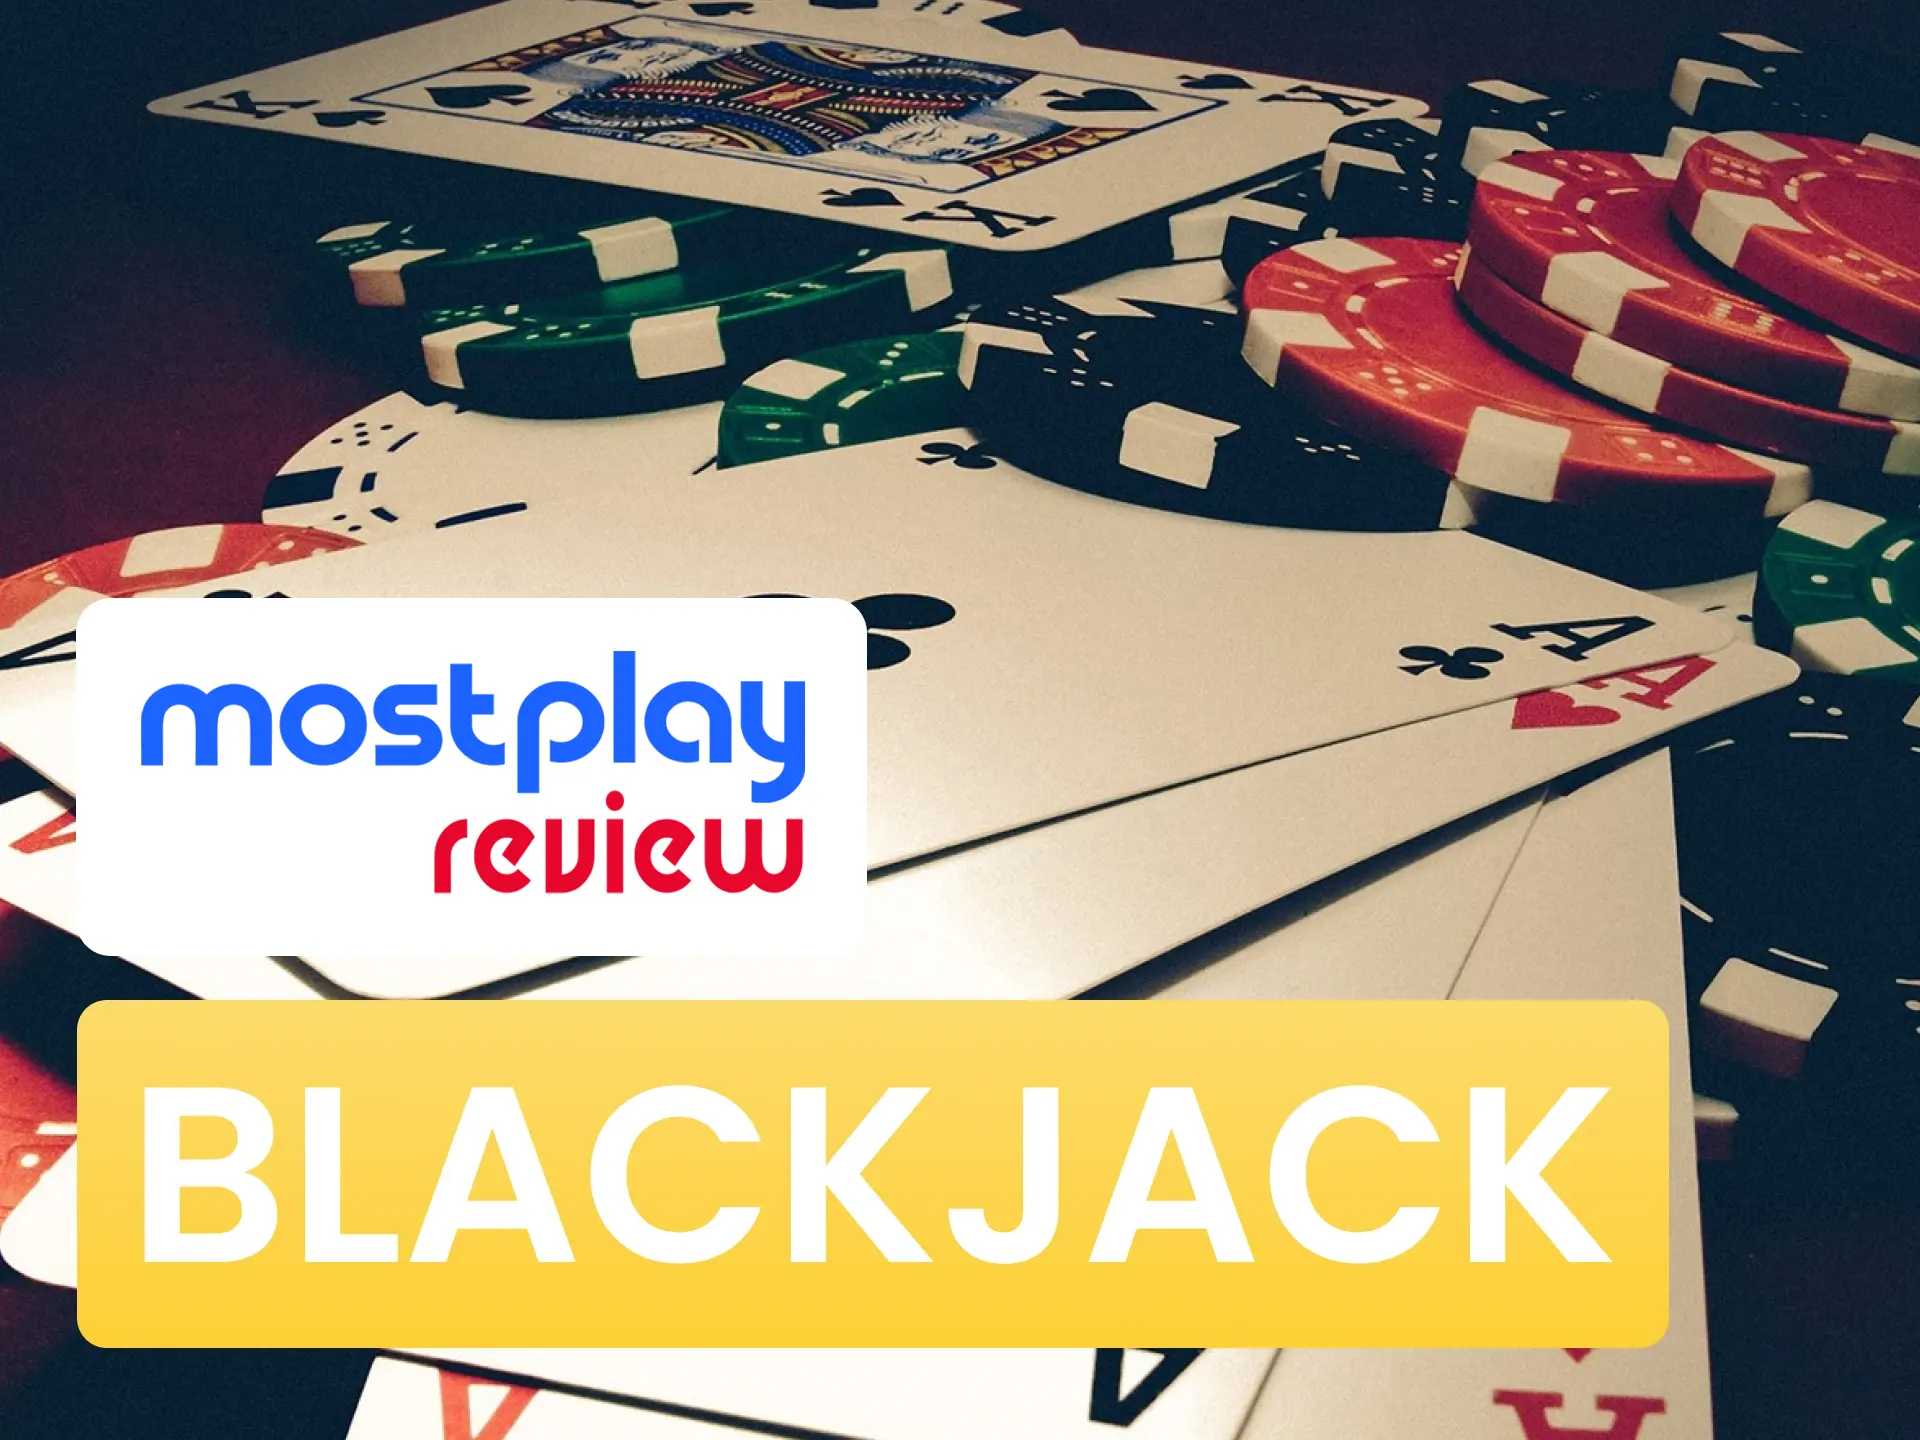 Get your combination in Mostplay blackjack and win money.